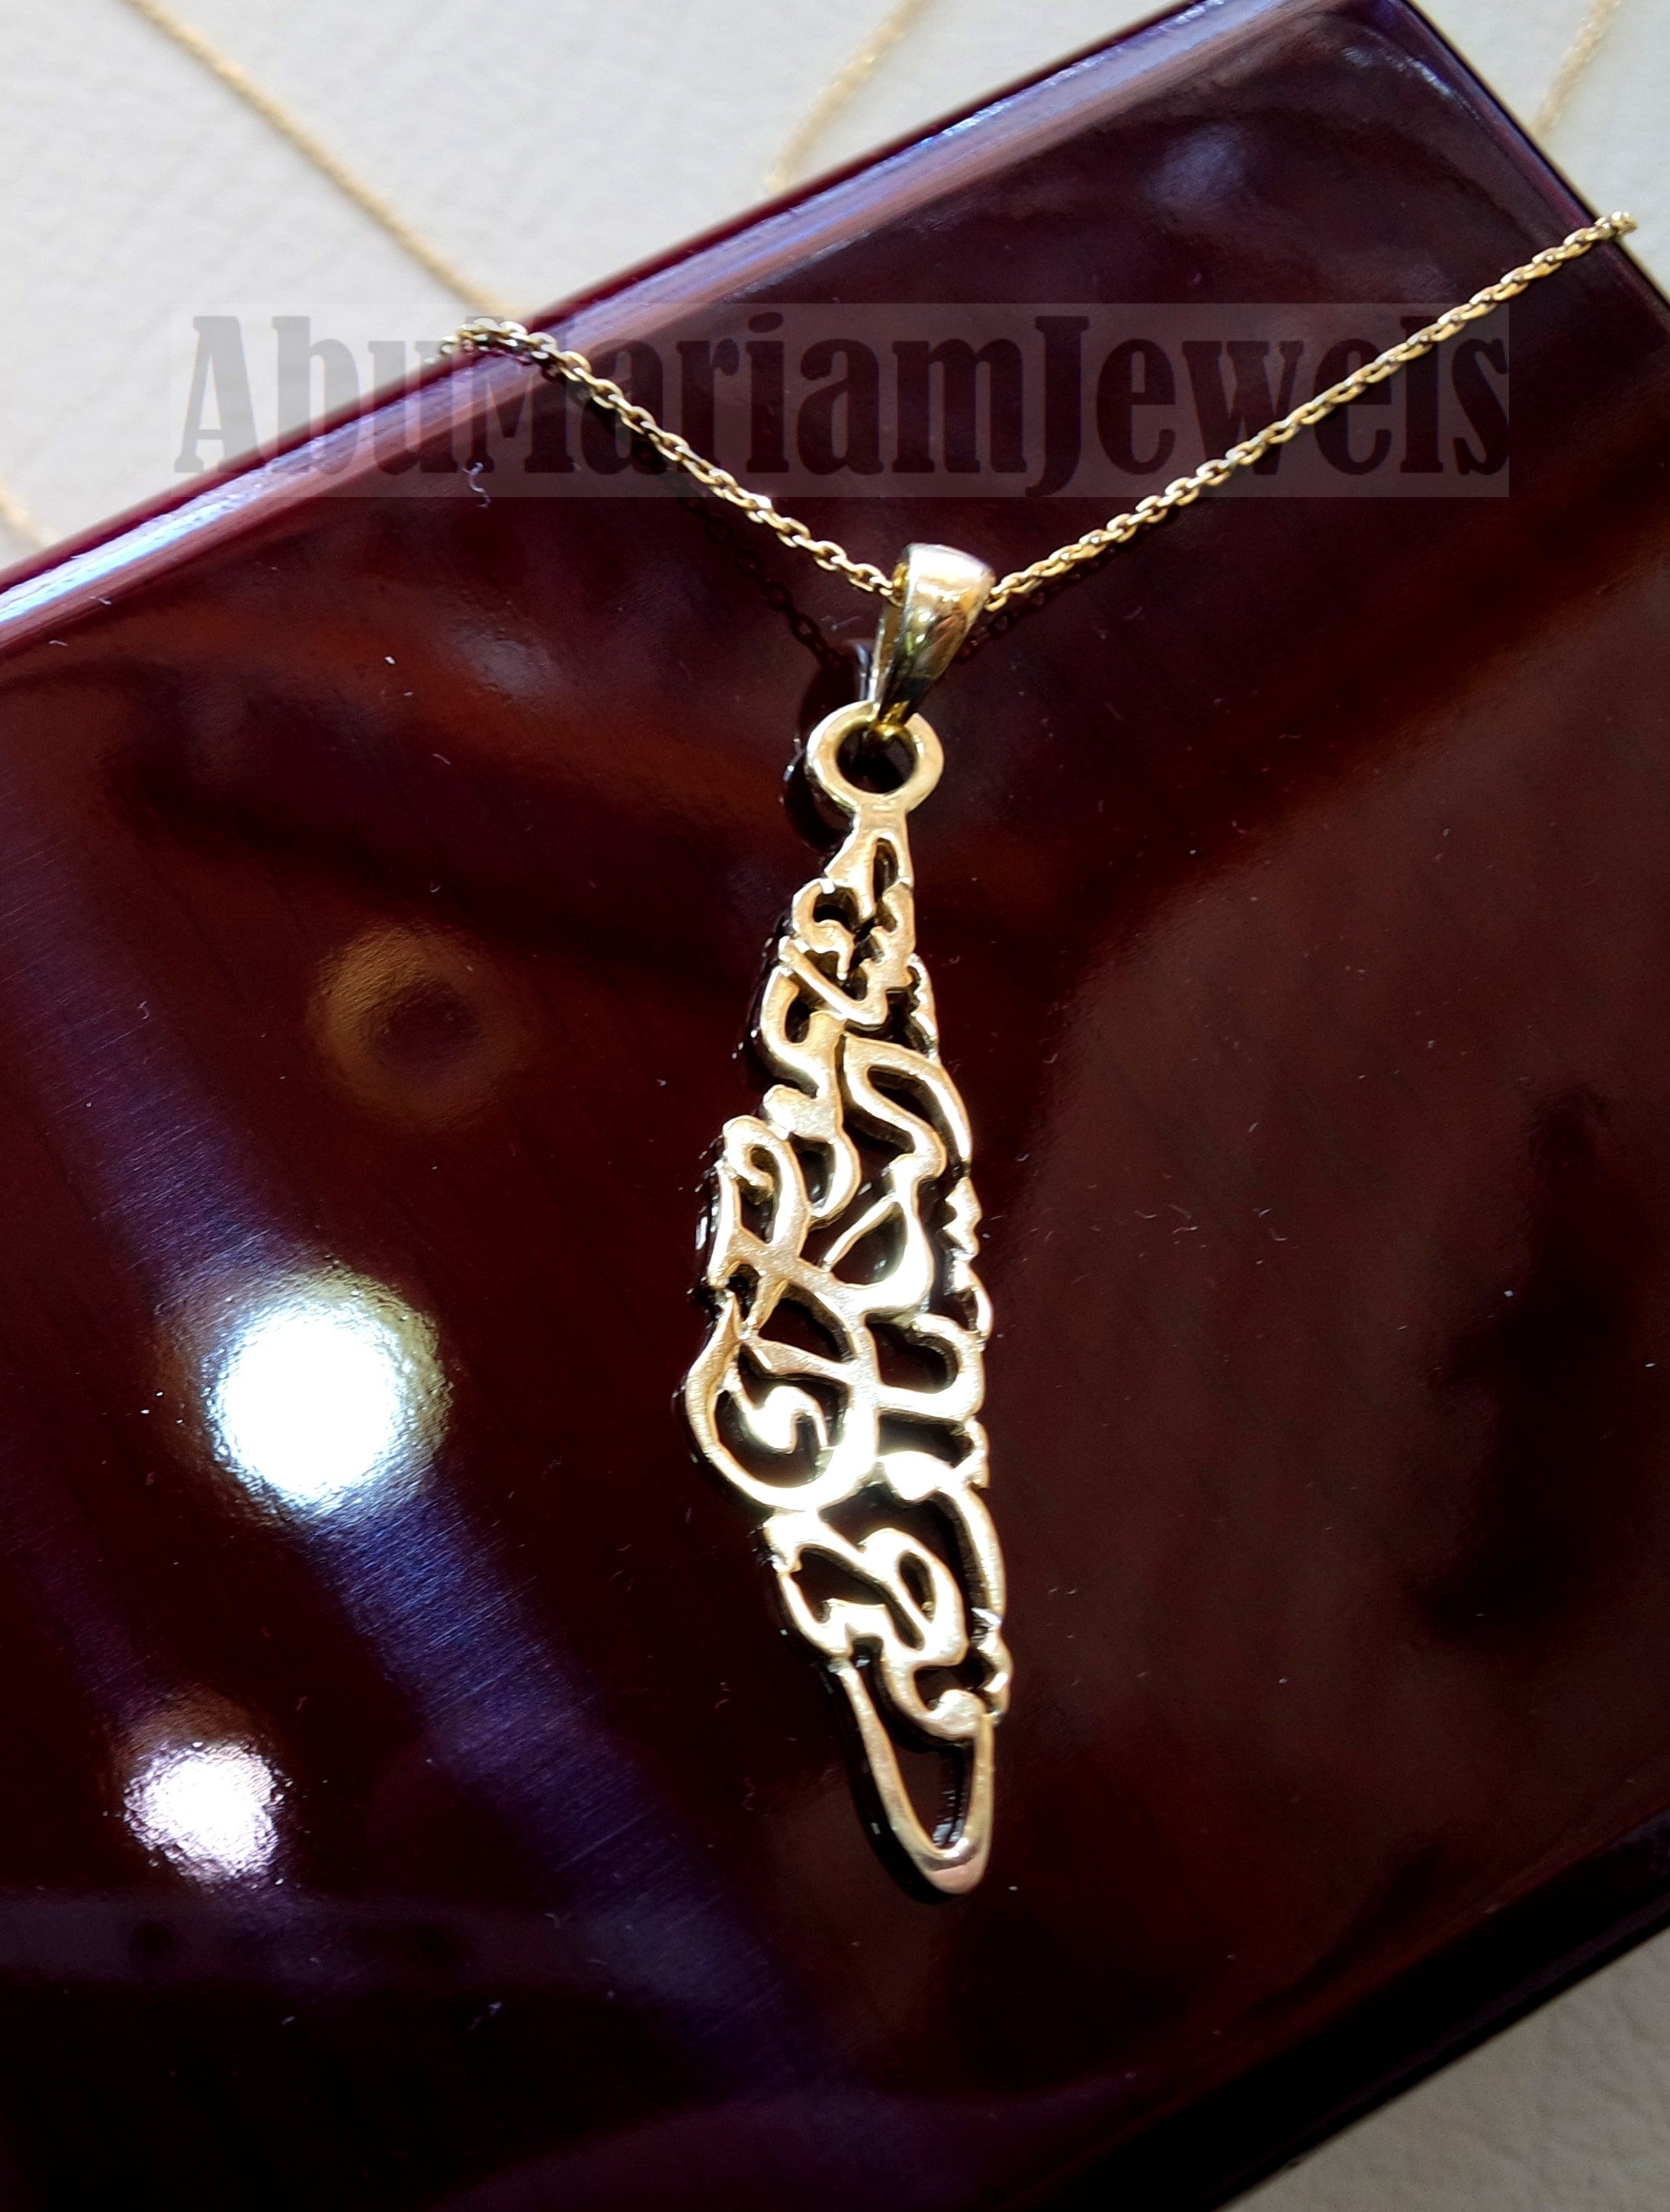 Palestine map necklace chain and pendant with famous verse 18K gold jewelry arabic fast shipping خارطه و علم فلسطين